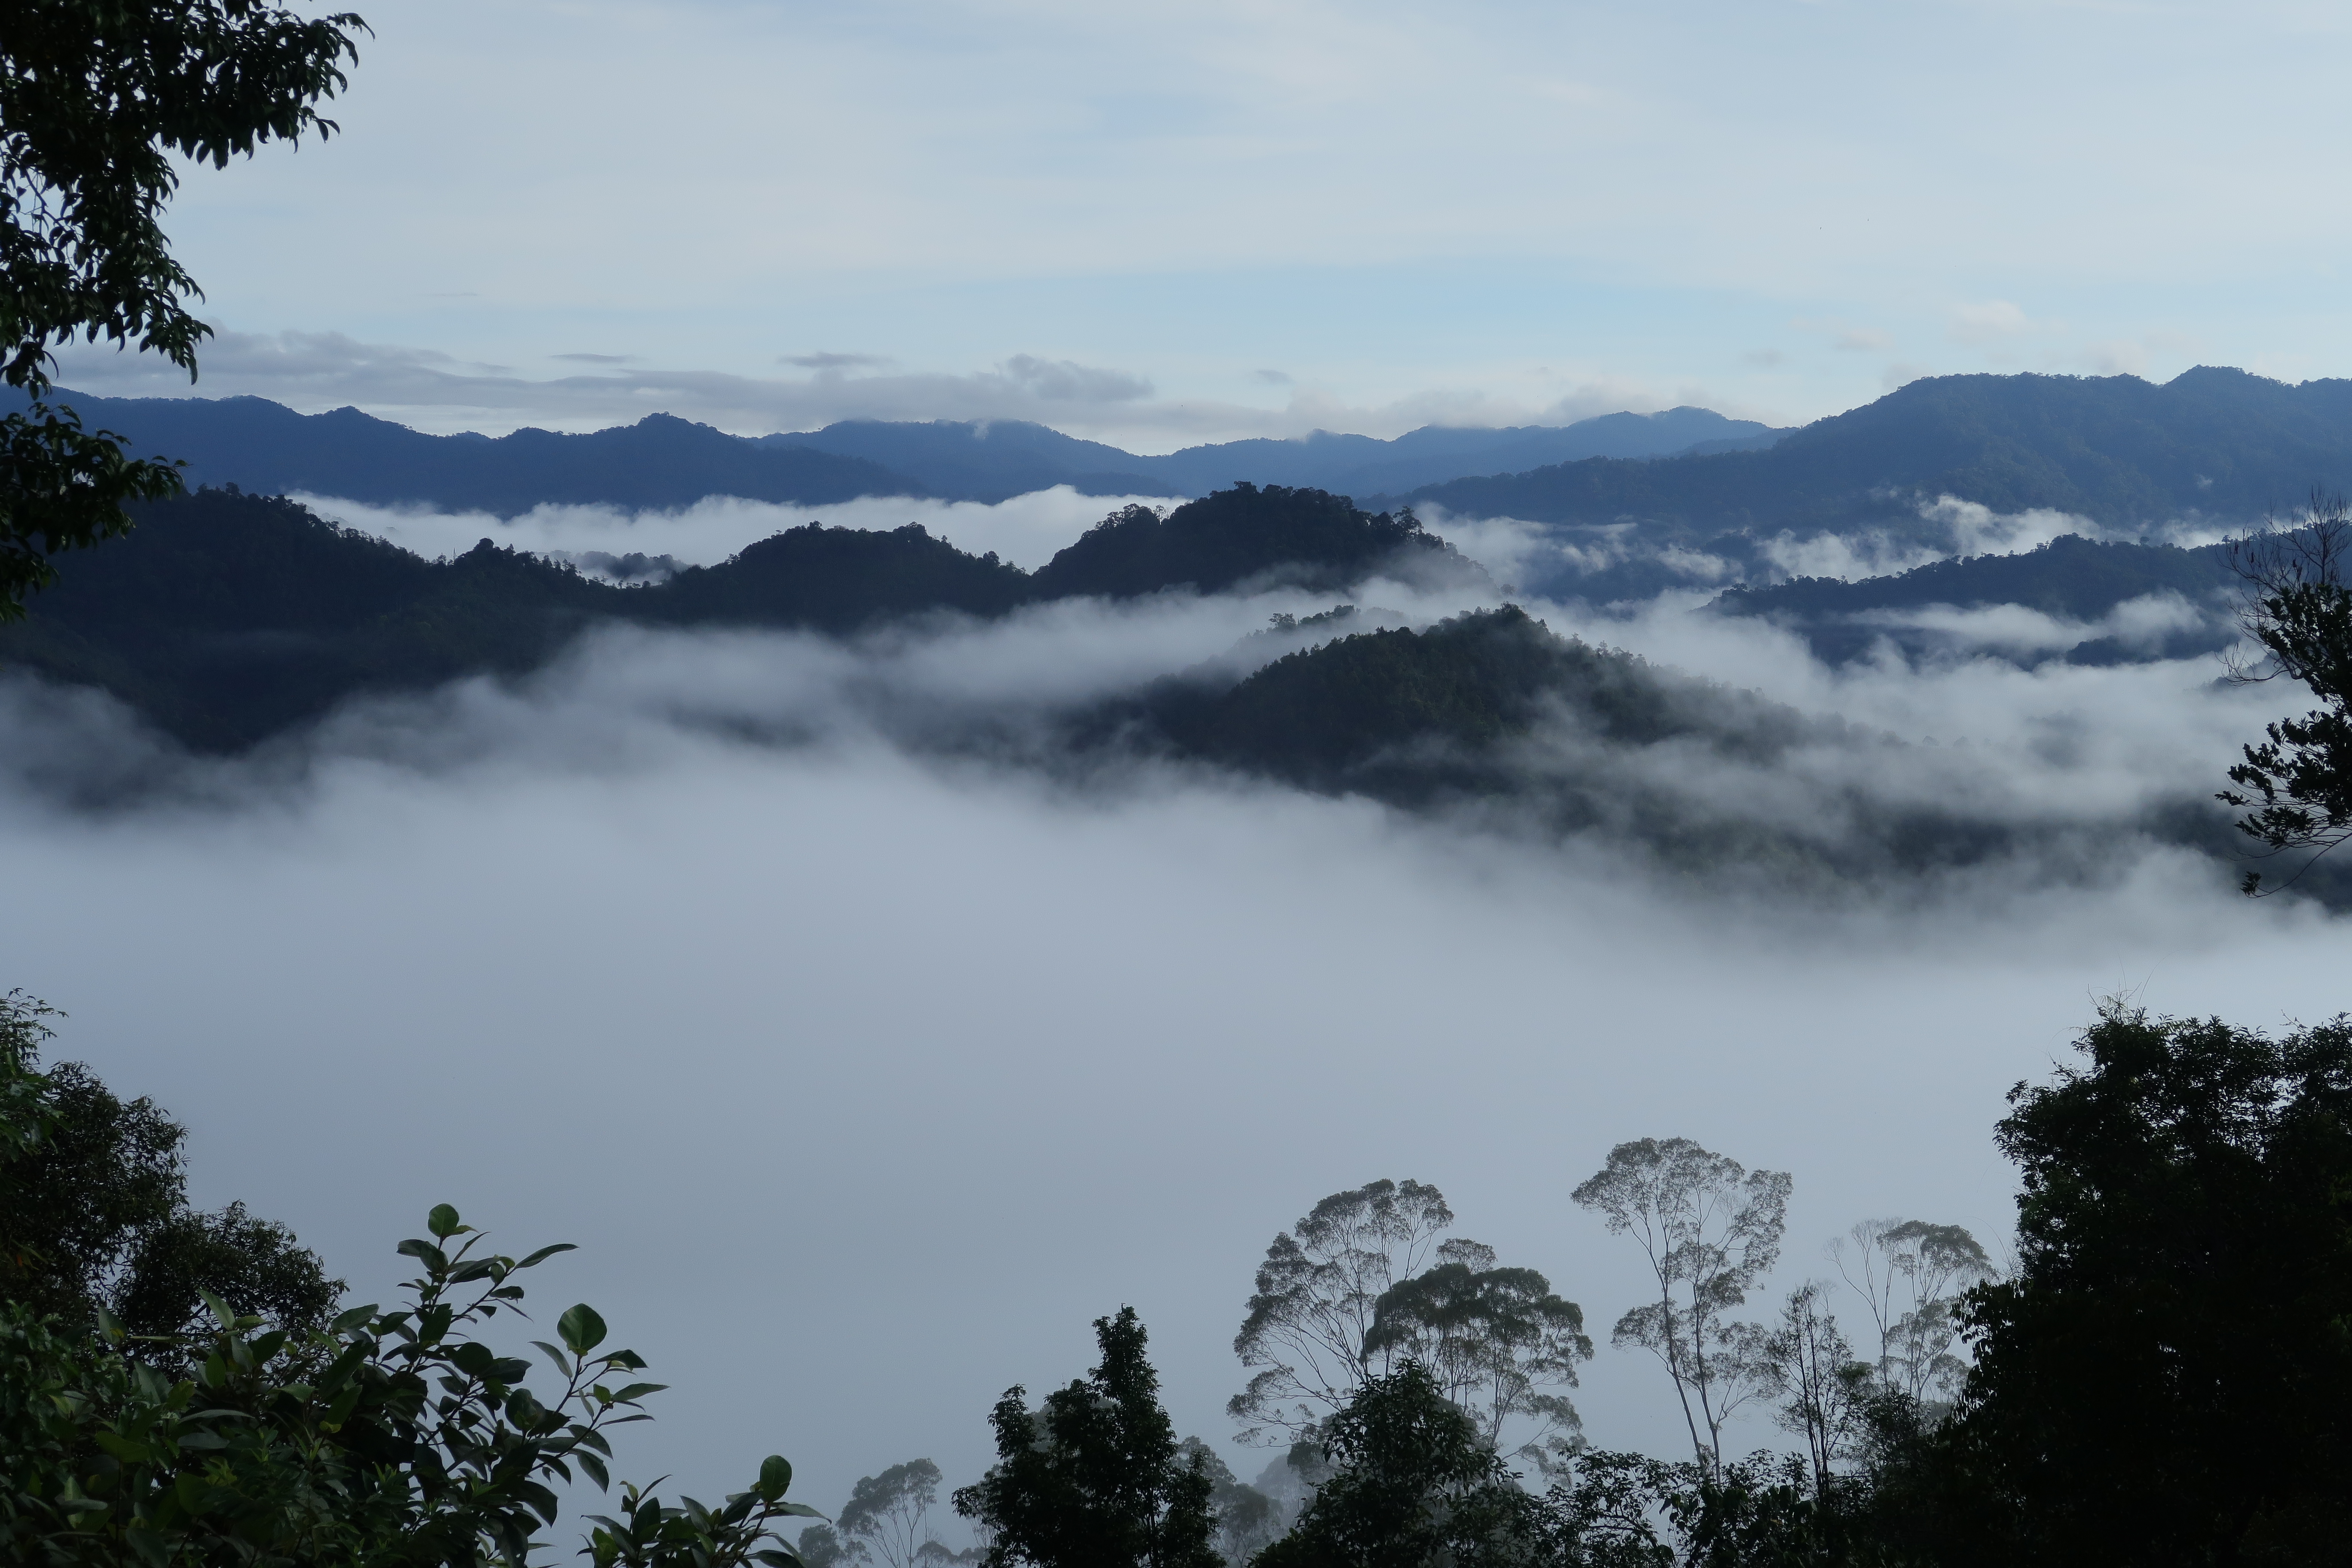 A landscape view shows forested hilltops emerging from low-lying cloud sitting in the valleys